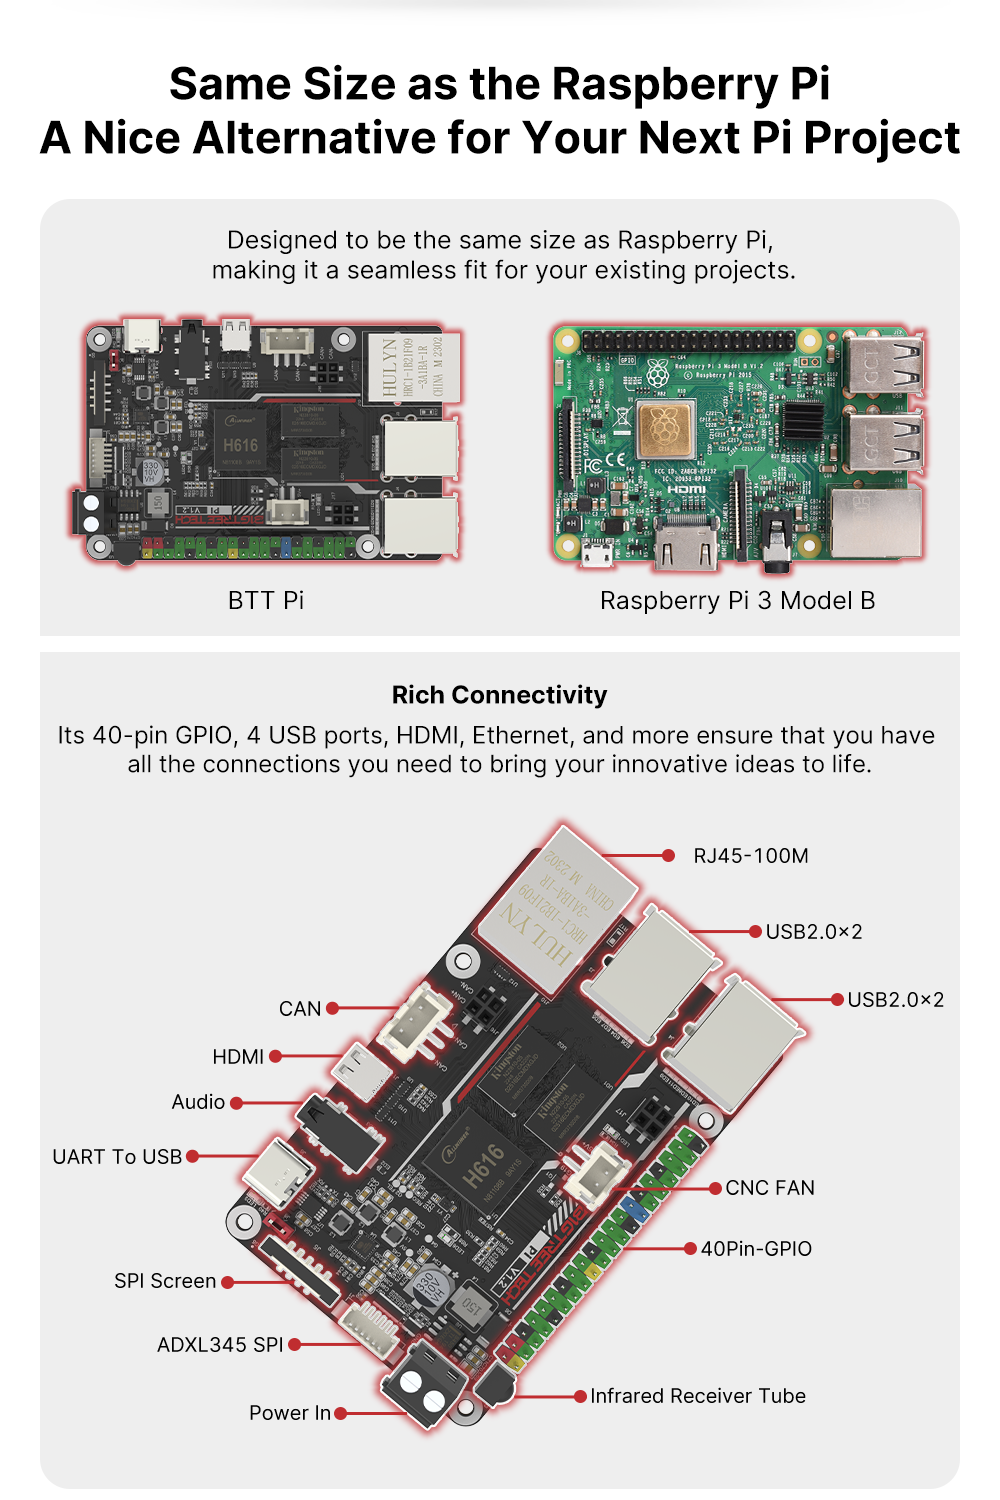 It has the same size as Raspberry Pi, making it a seamless fit for your exsiting projects.